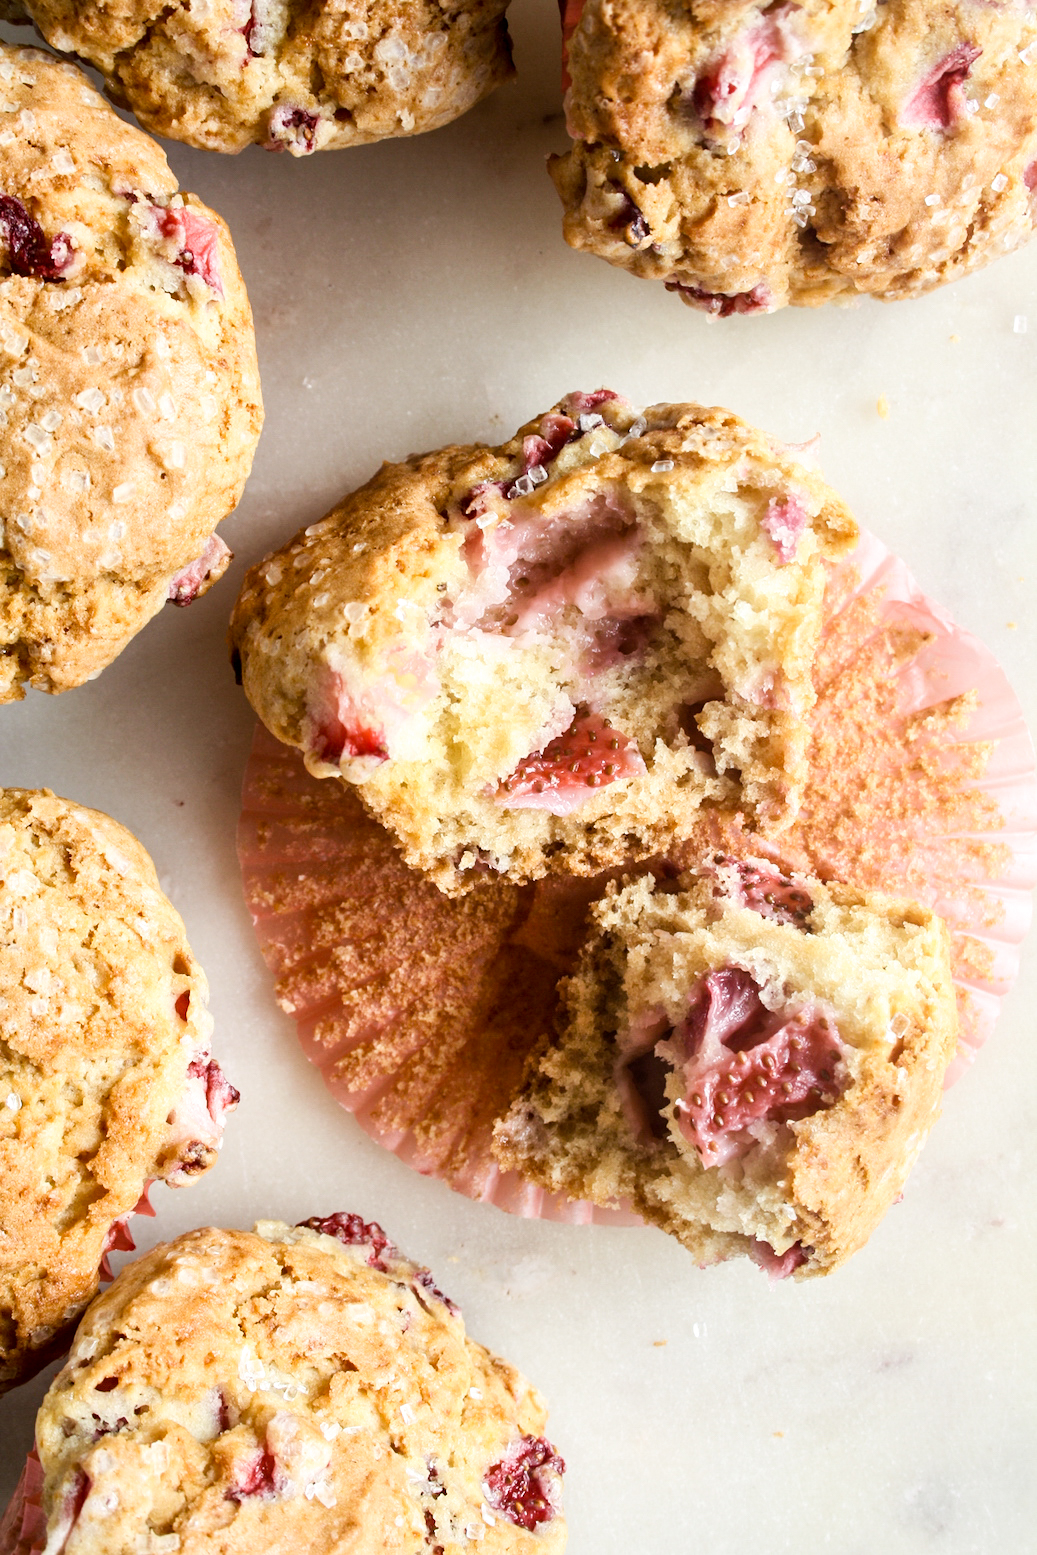 Soft, crispy-topped muffins with fresh strawberry pieces